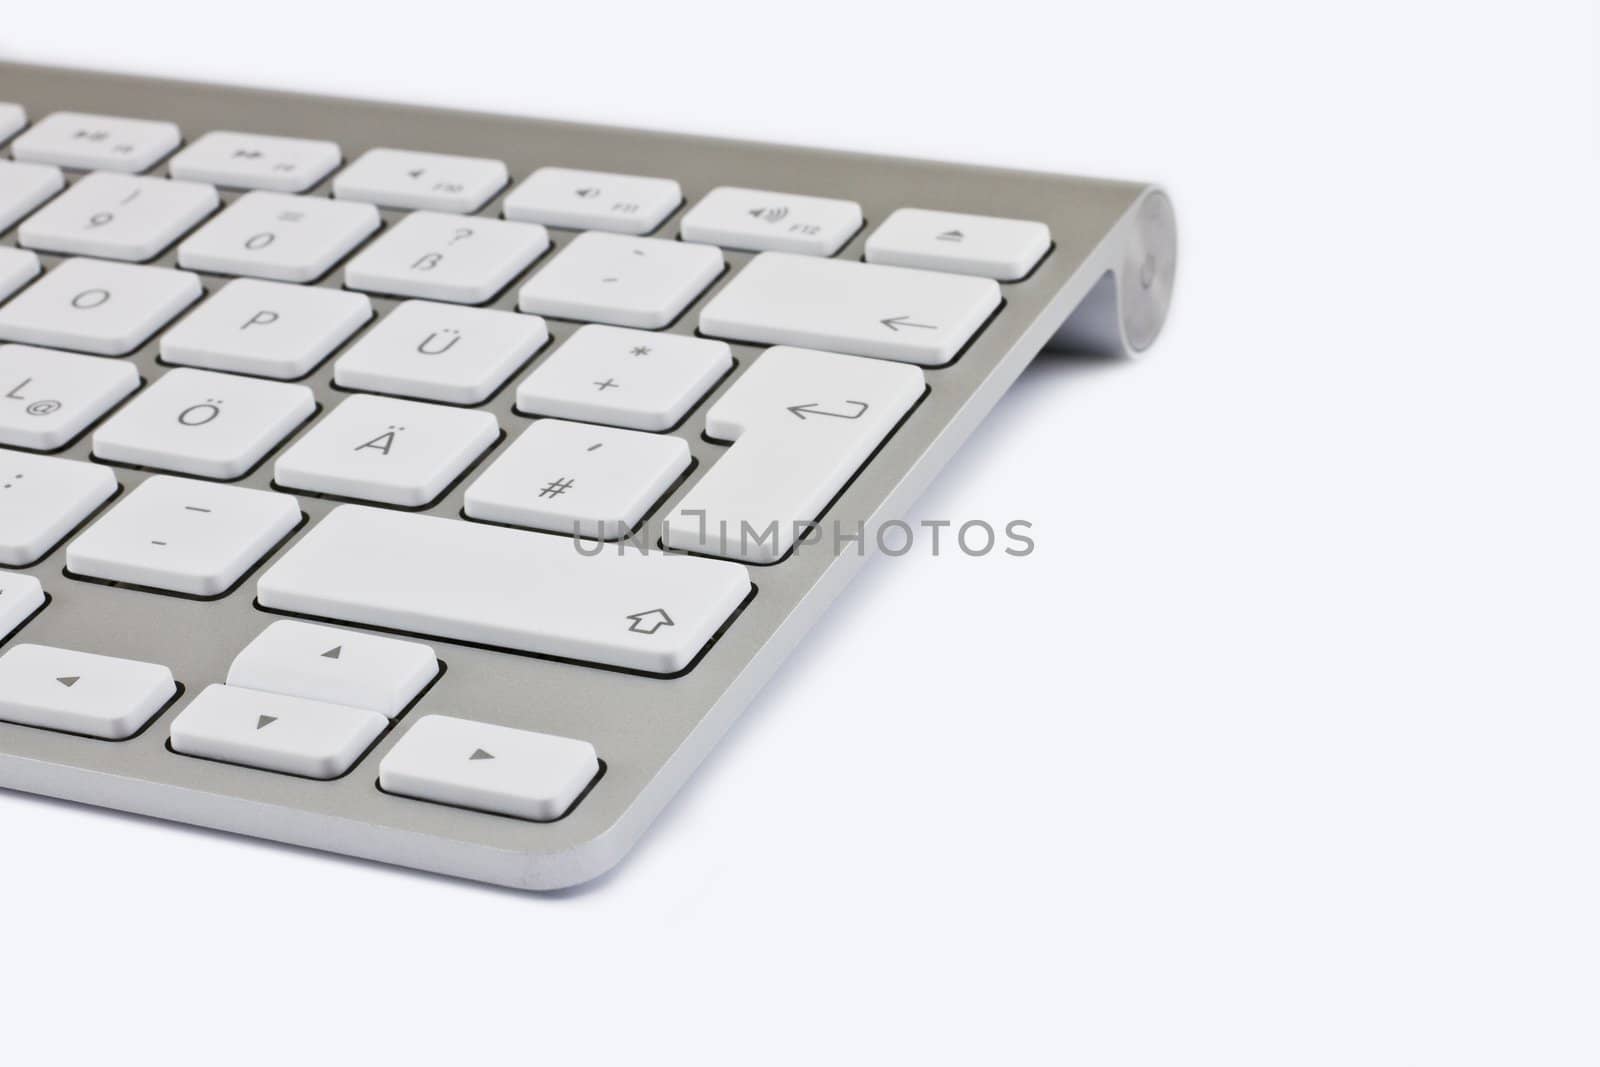 Computer keyboard with white keys